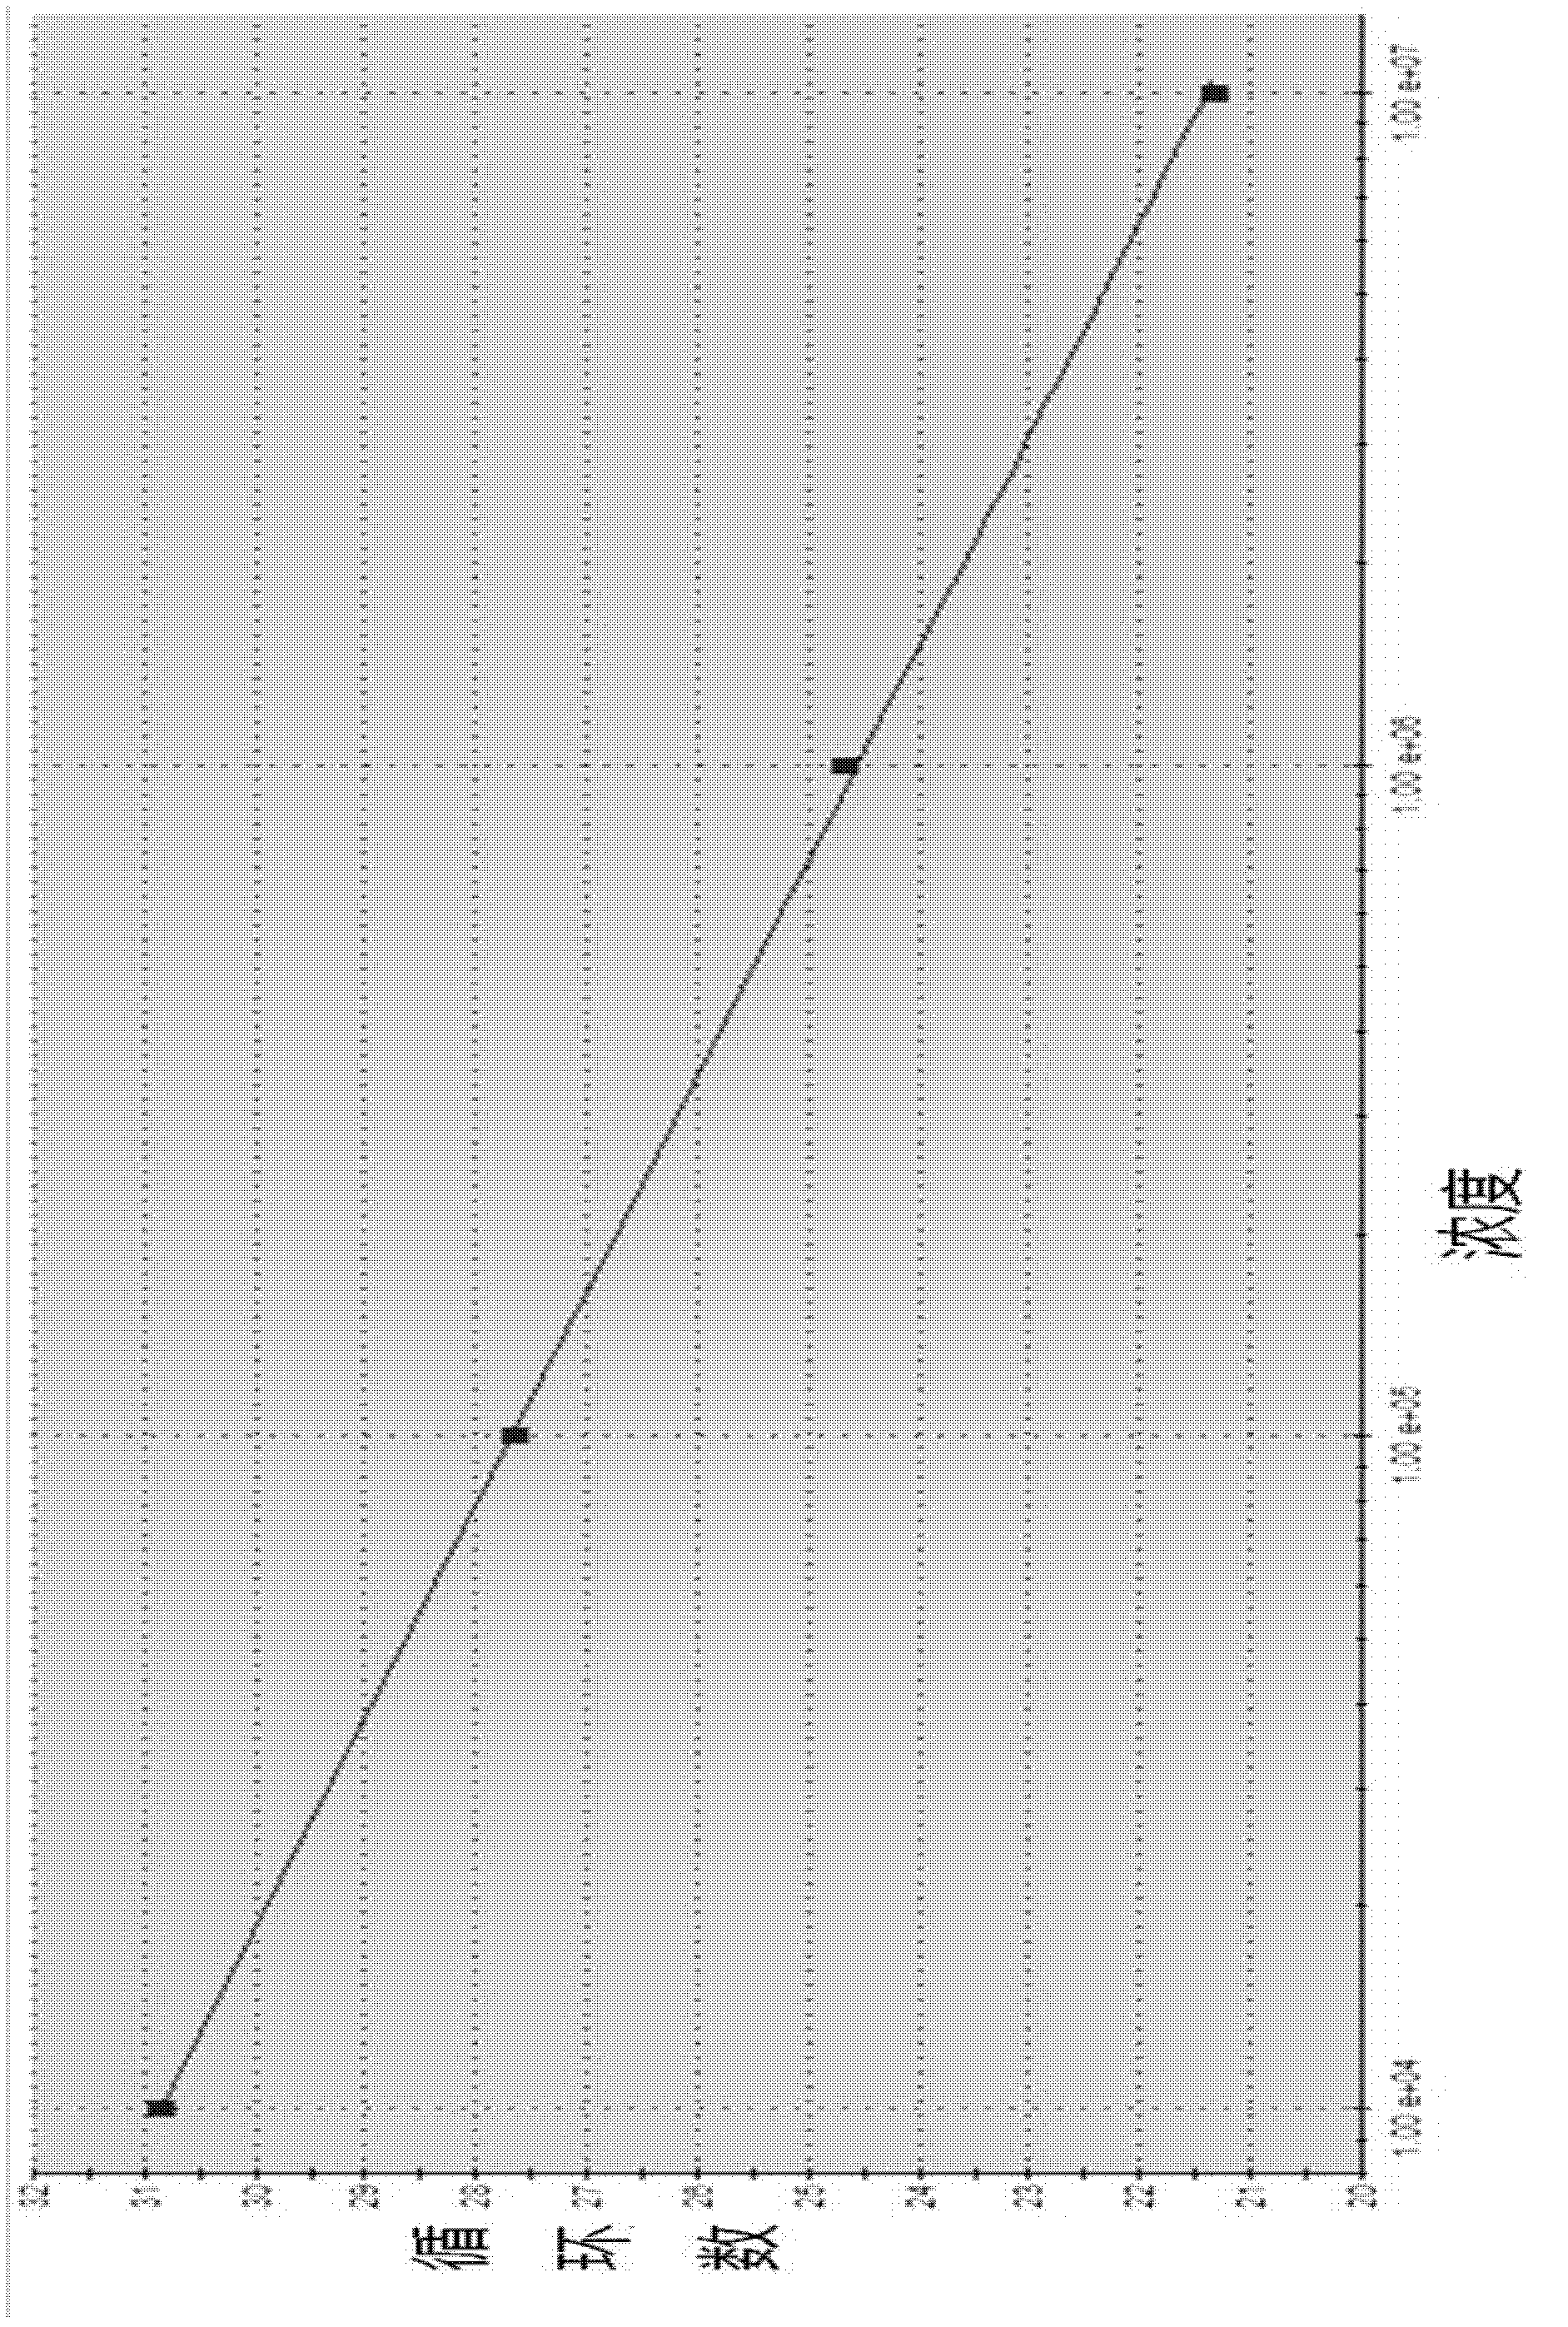 Ureaplasma urealyticum PCR (Polymerase Chain Reaction) detection kit and detection method thereof